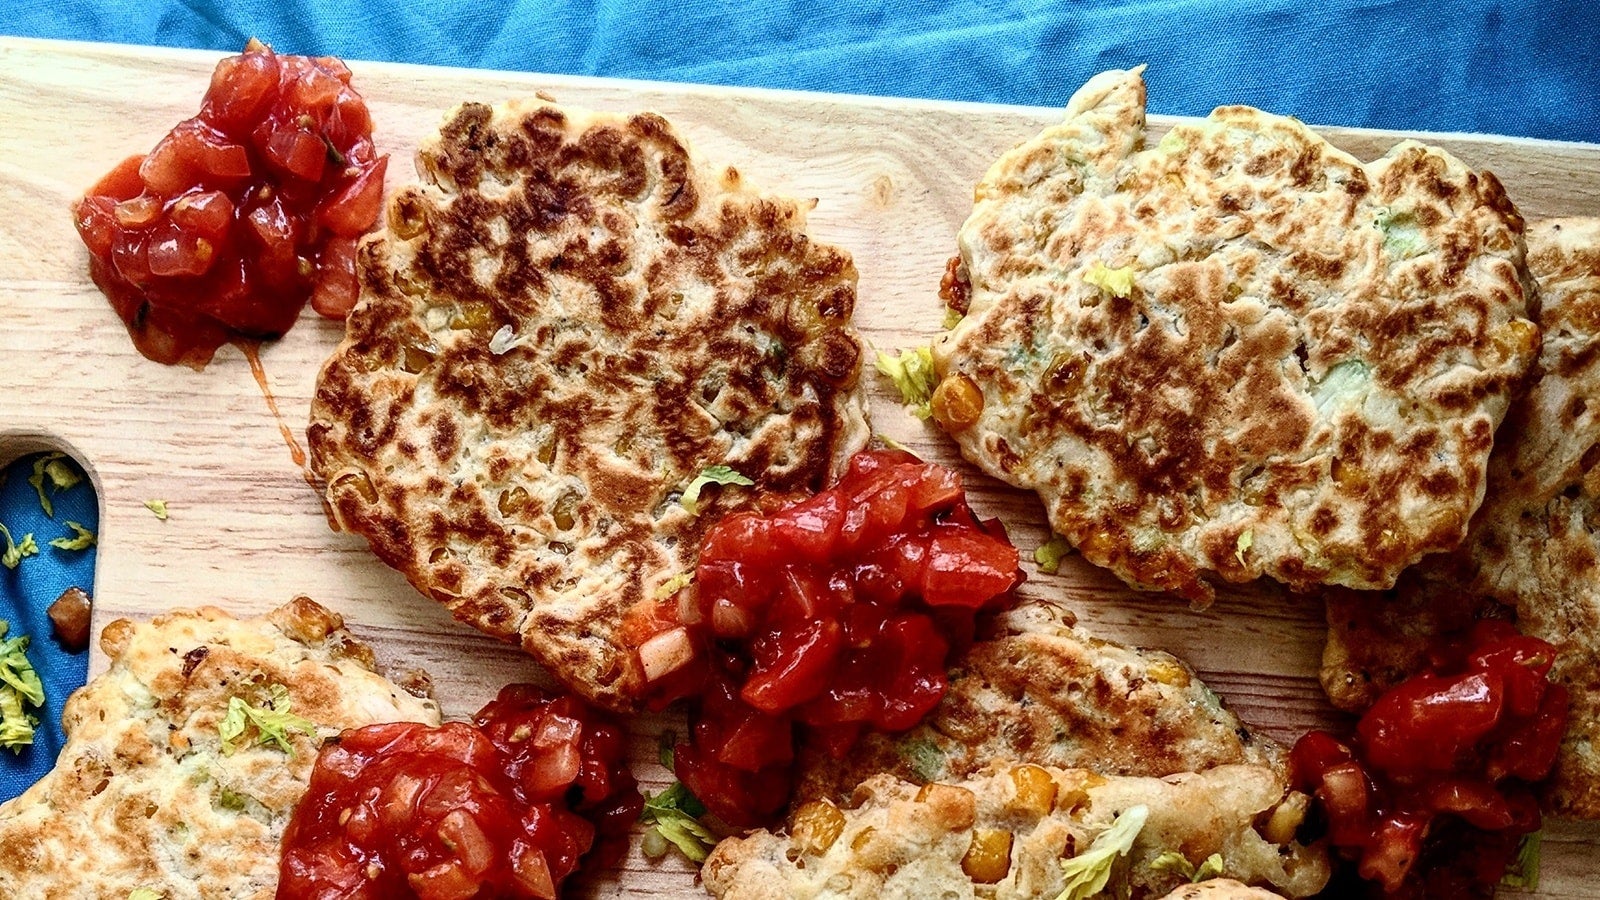 sweetcorn fritters on a wooden serving platter